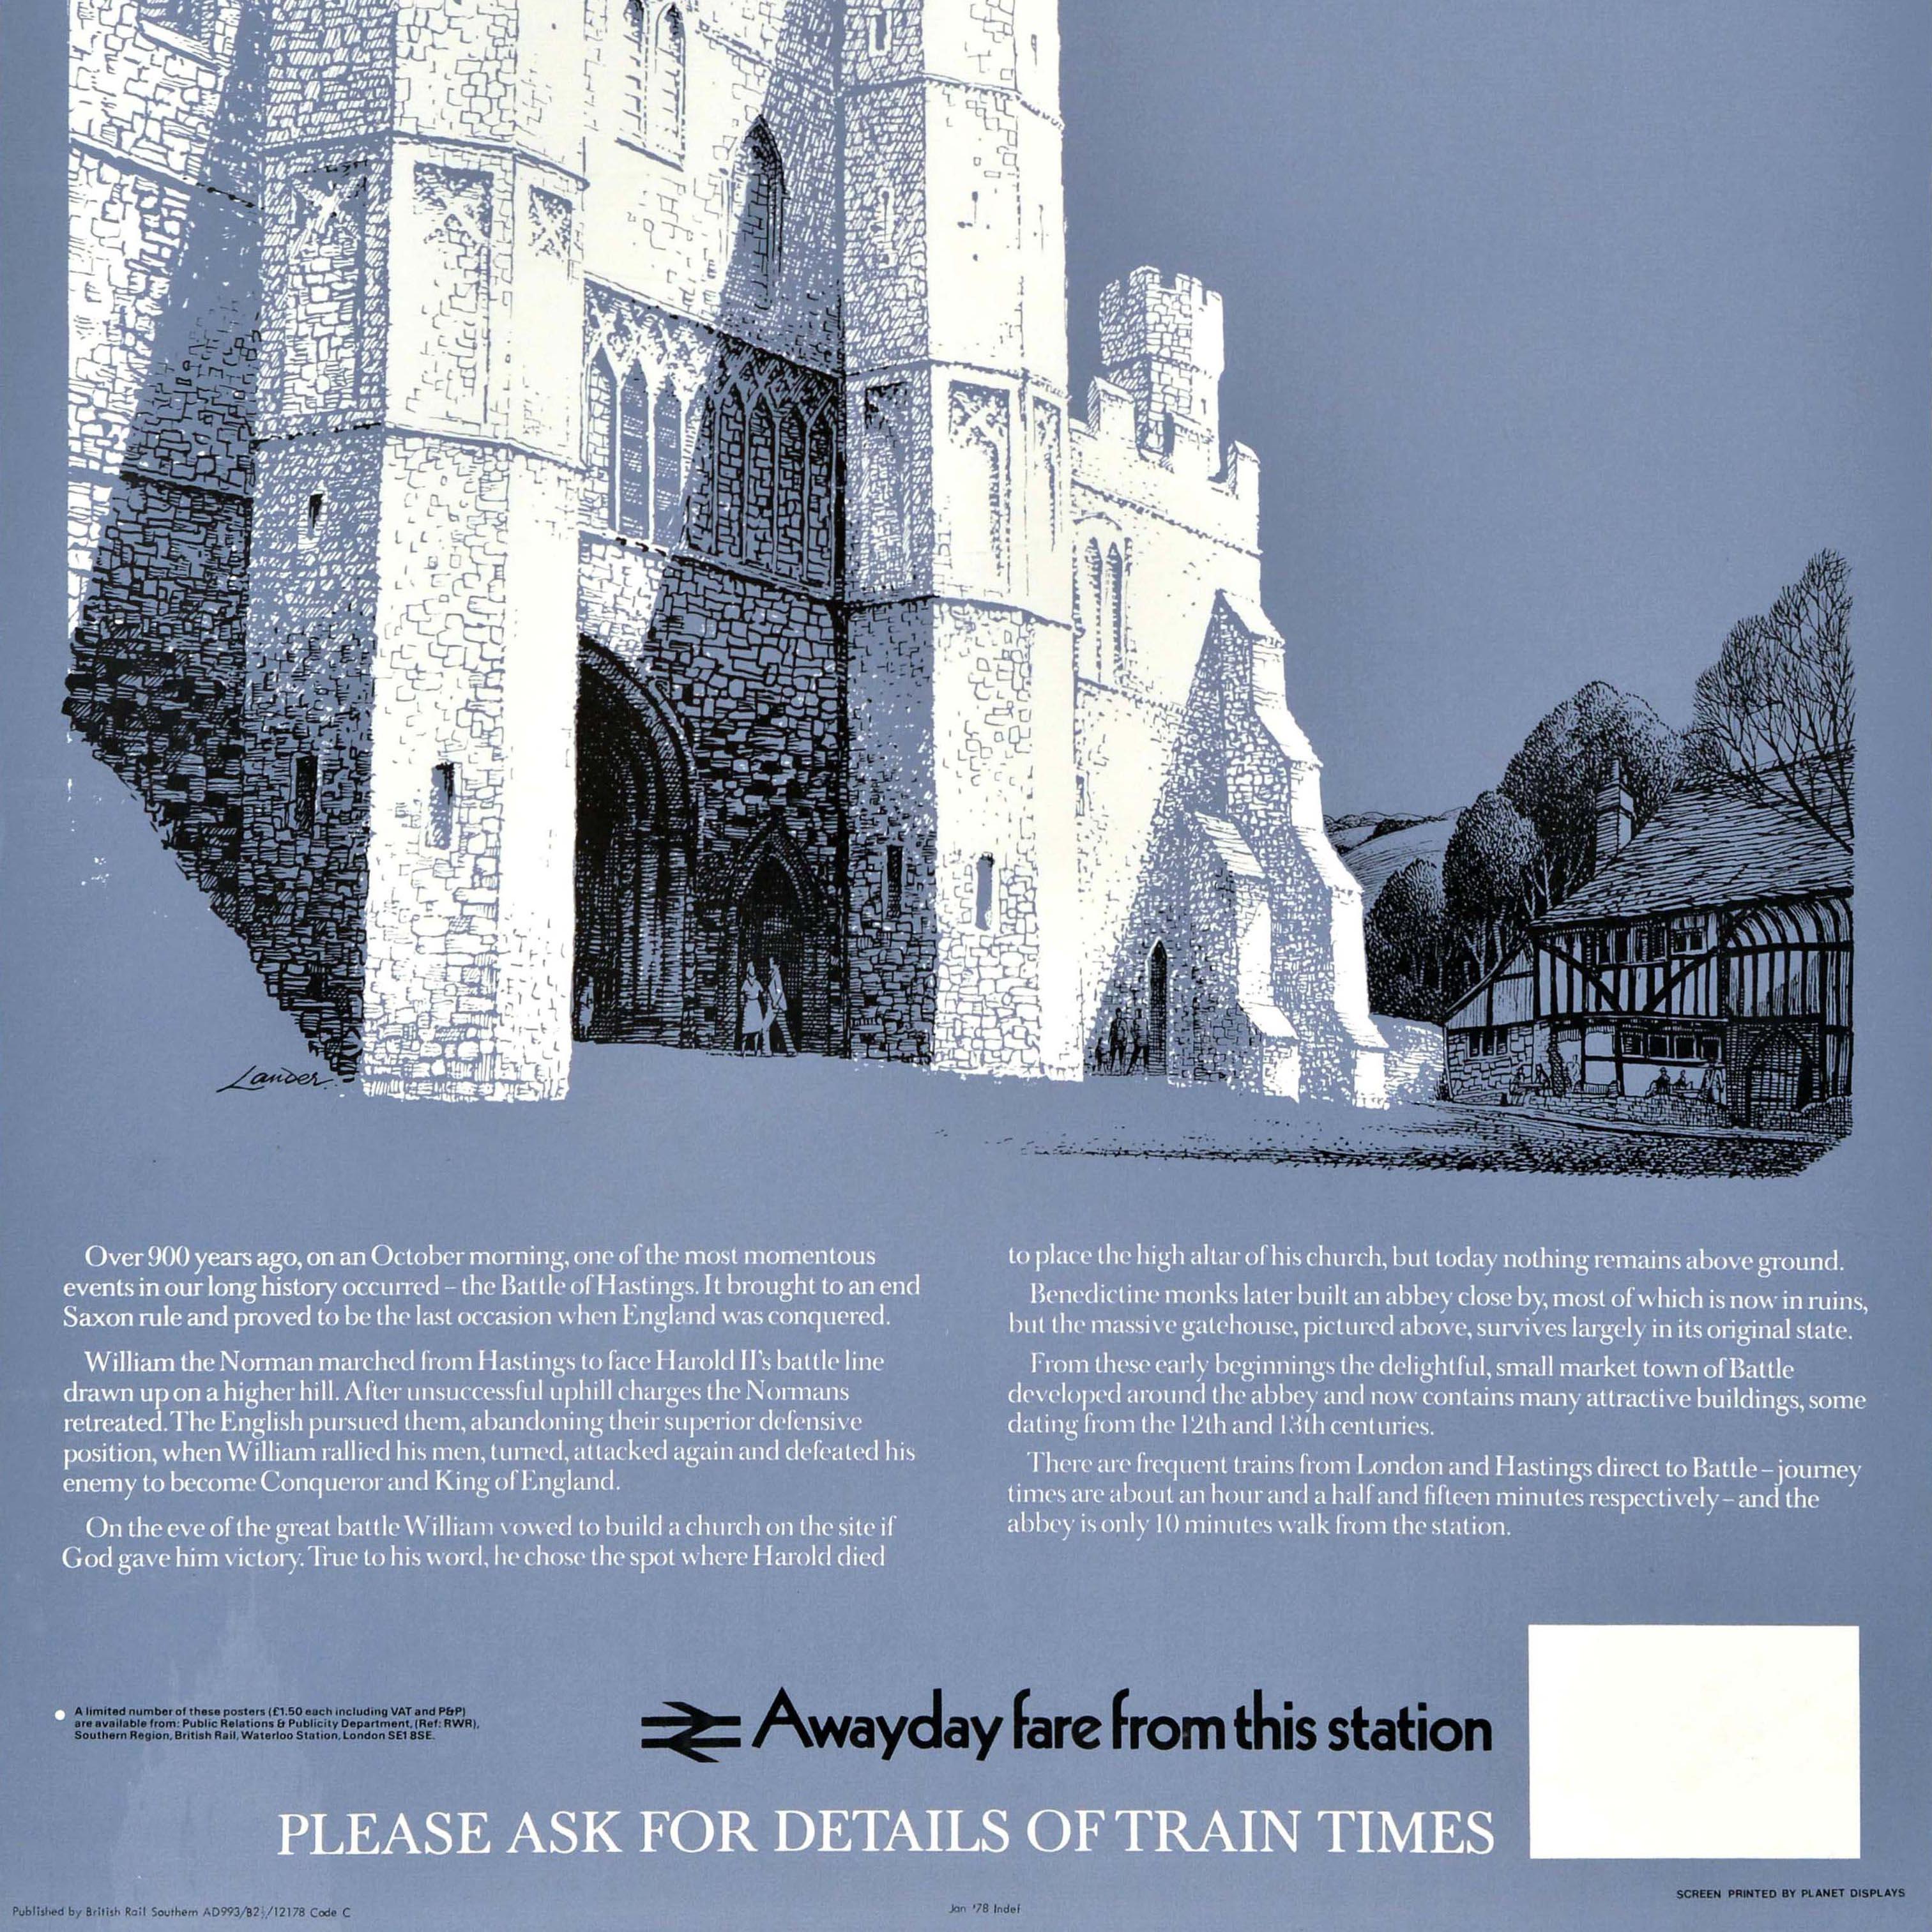 Original vintage train travel poster - Visit Battle - featuring artwork by the notable commercial artist and poster designer Reginald Montague Lander (1913-1980) depicting people visiting the partially ruined historic Battle Abbey in Sussex built in